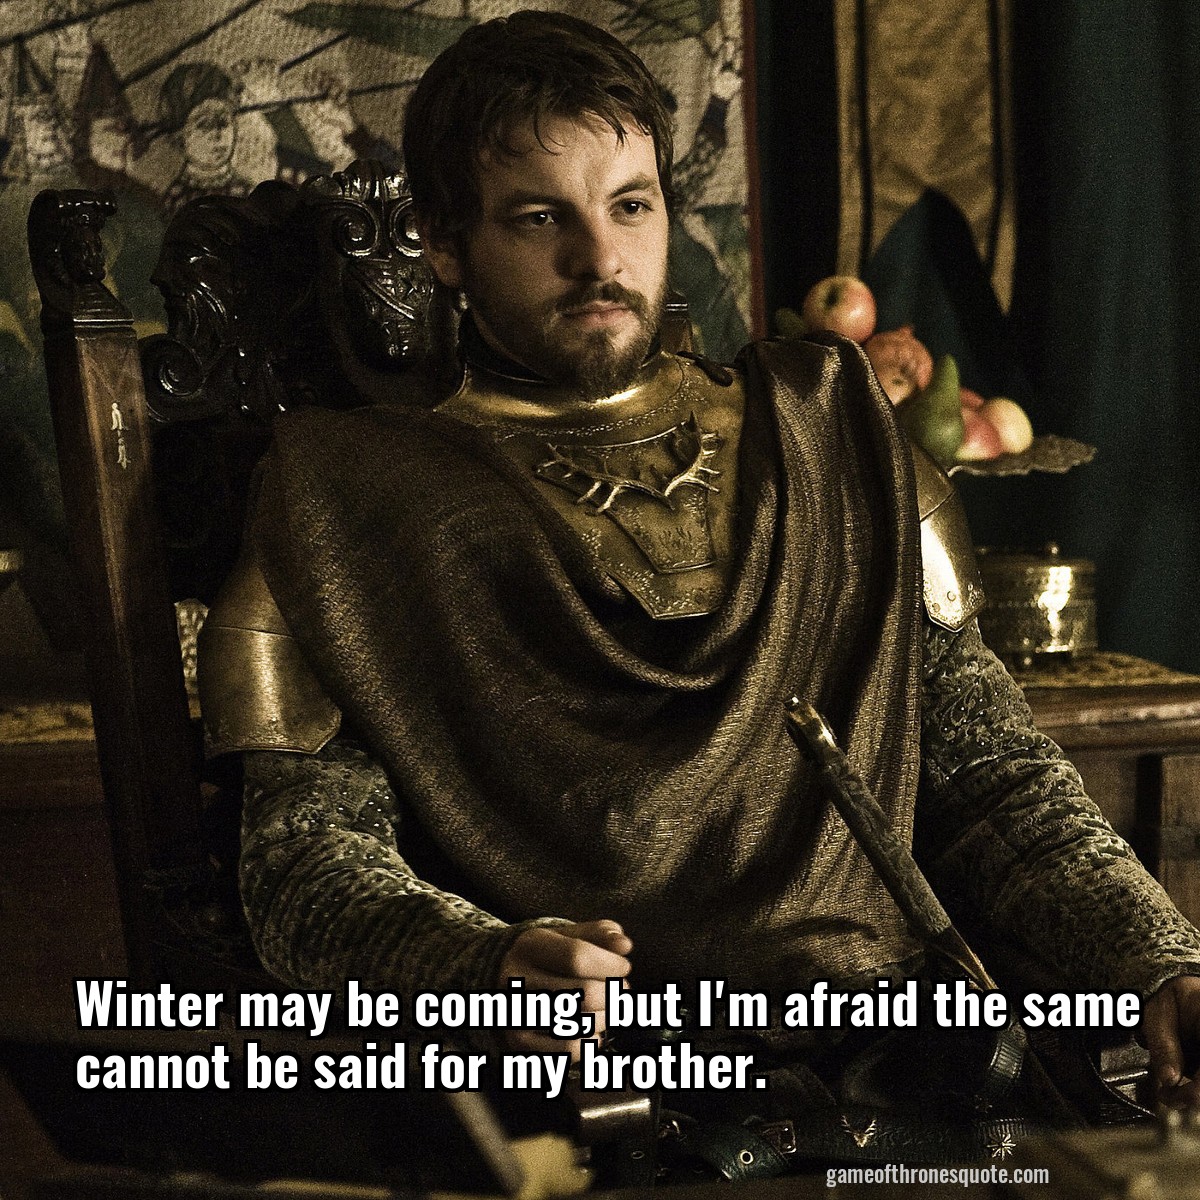 Winter may be coming, but I'm afraid the same cannot be said for my brother.